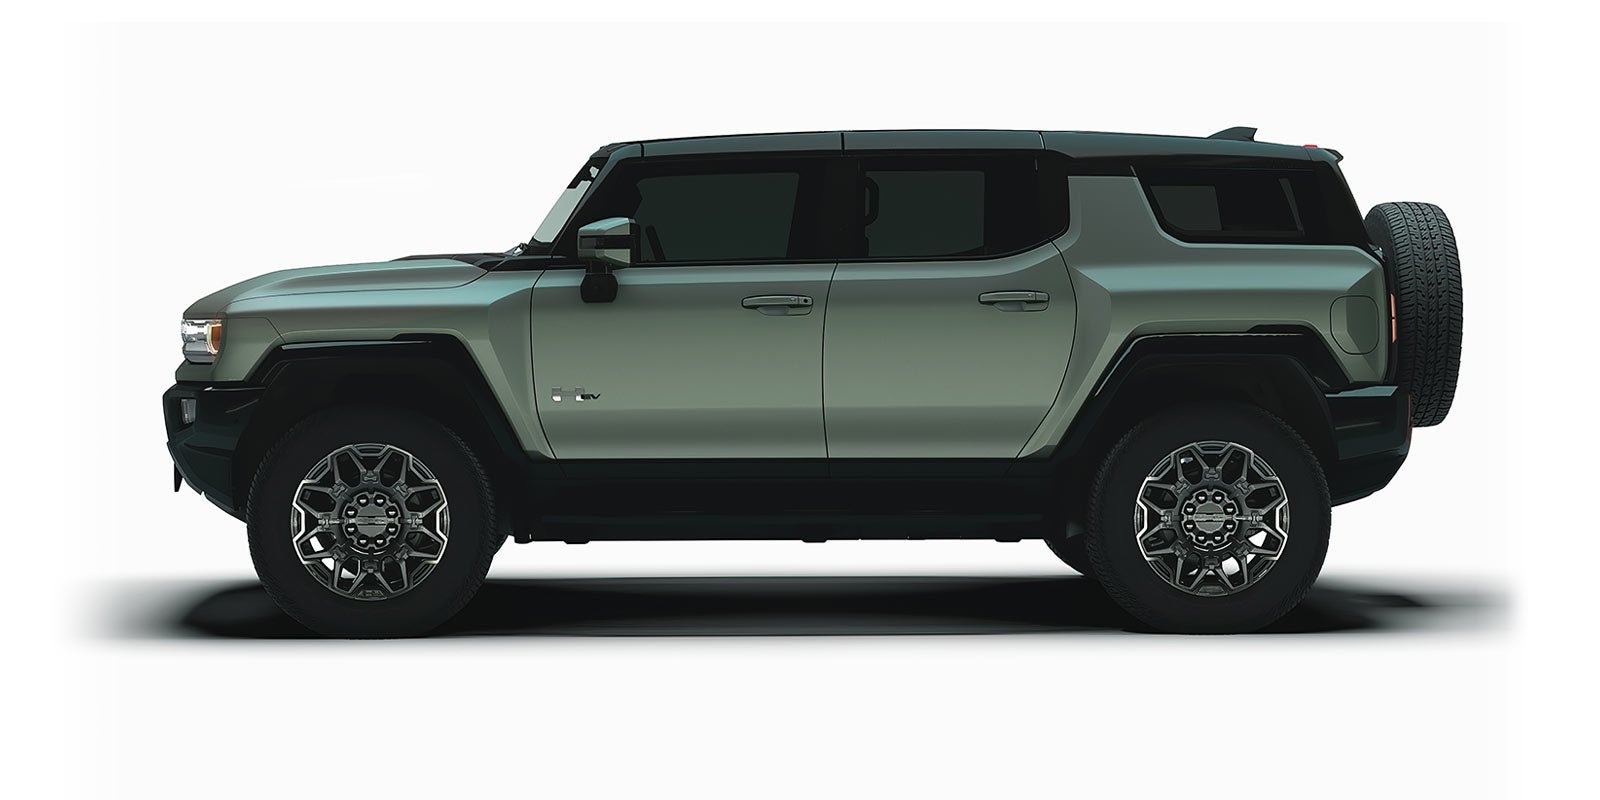 hummer ev pickup and hummer ev | LaFontaine Buick GMC Dearborn in Dearborn MI